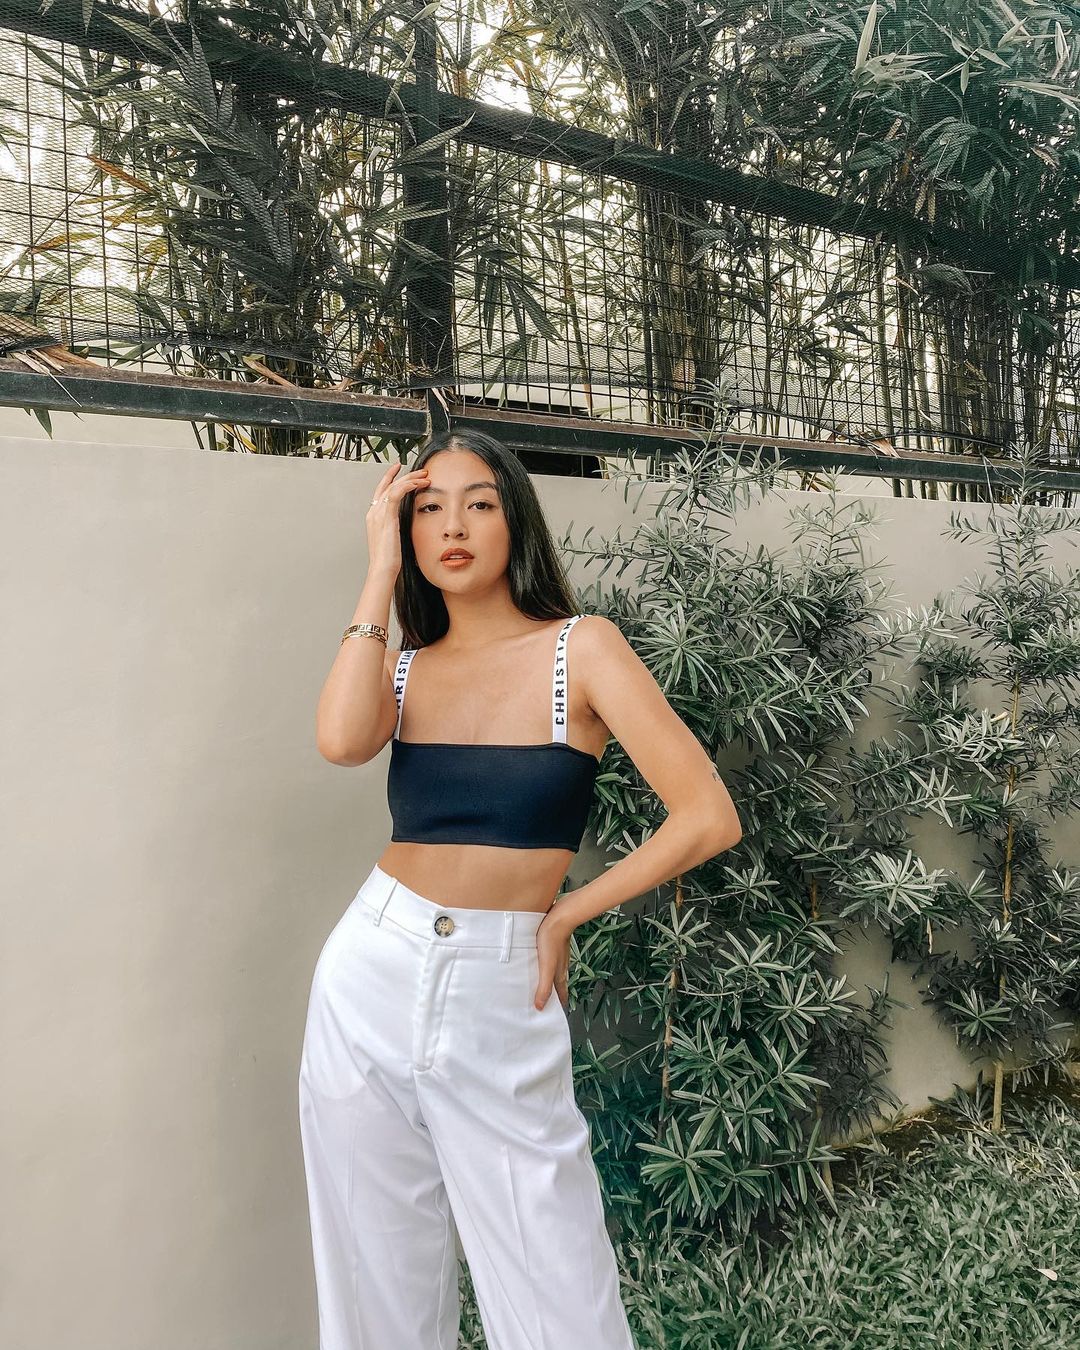 lowkey sultry ootd roundup